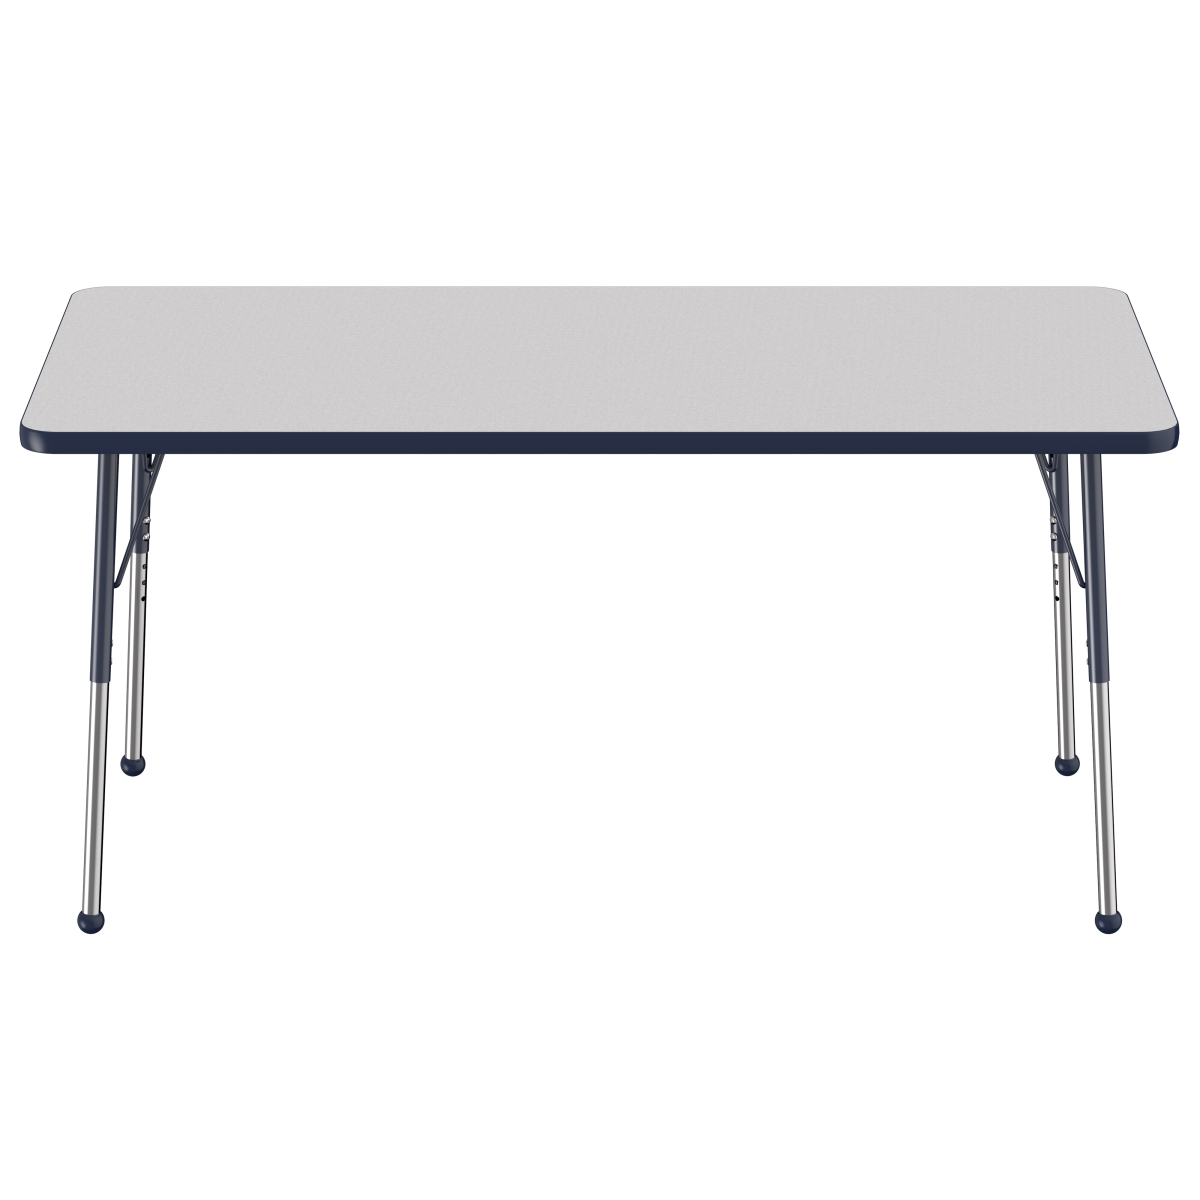 10024-gynv 30 X 60 In. Rectangle T-mold Adjustable Activity Table With Standard Ball - Grey & Navy